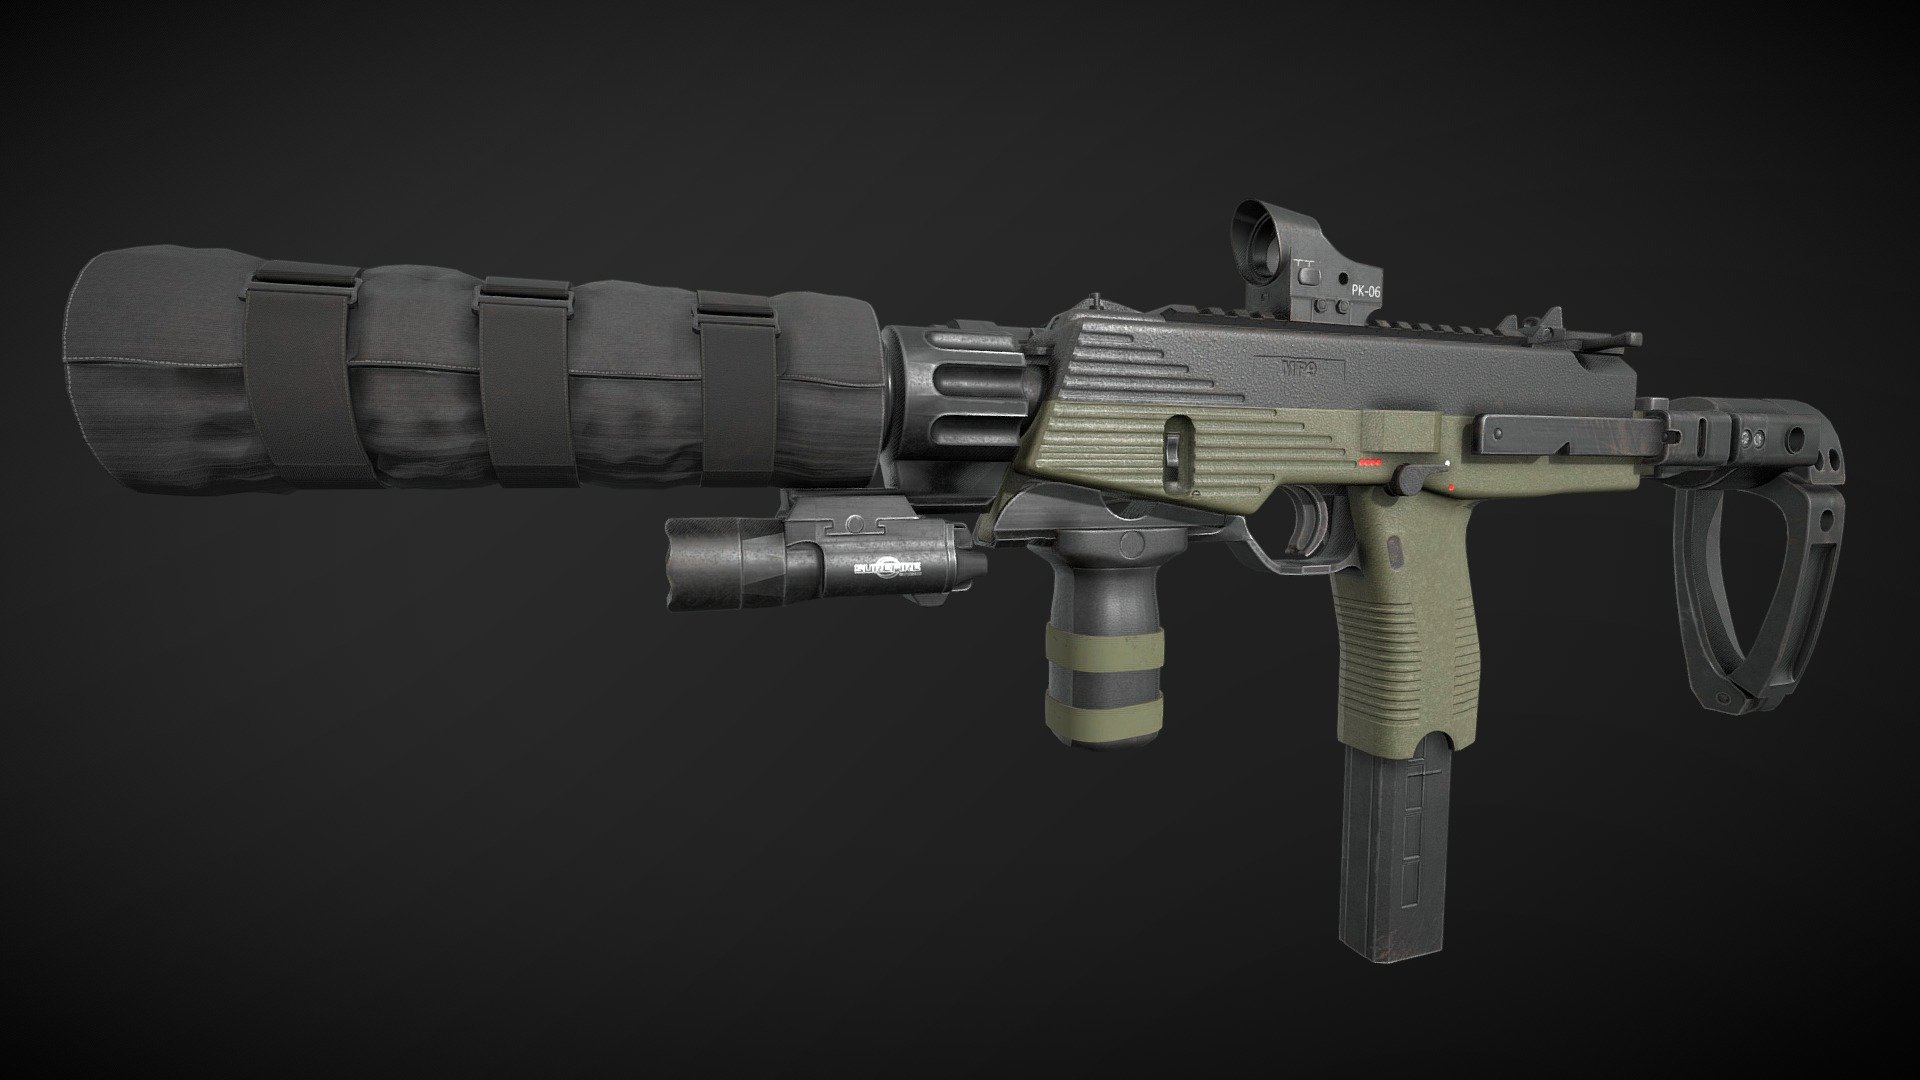 I had a blast creating this one. B&amp;T MP9 with some custom part that I've found inspiration on the internet.
Modelled in blender, textured in substance painter.

MP9: 17.632 tri
Zenitco perst-4: 7.550 tri
Silencor + cover: 5.677 tri
Surefire x300: 2.820 tri
PK06: 1.758 tri
Grip: 1.452 tri

2k texture: MP9 &amp; Silencor
1k texture: Zenitco &amp; Surefire &amp; PK06 &amp; Grip - MP9 custom - 3D model by 1fluux 3d model